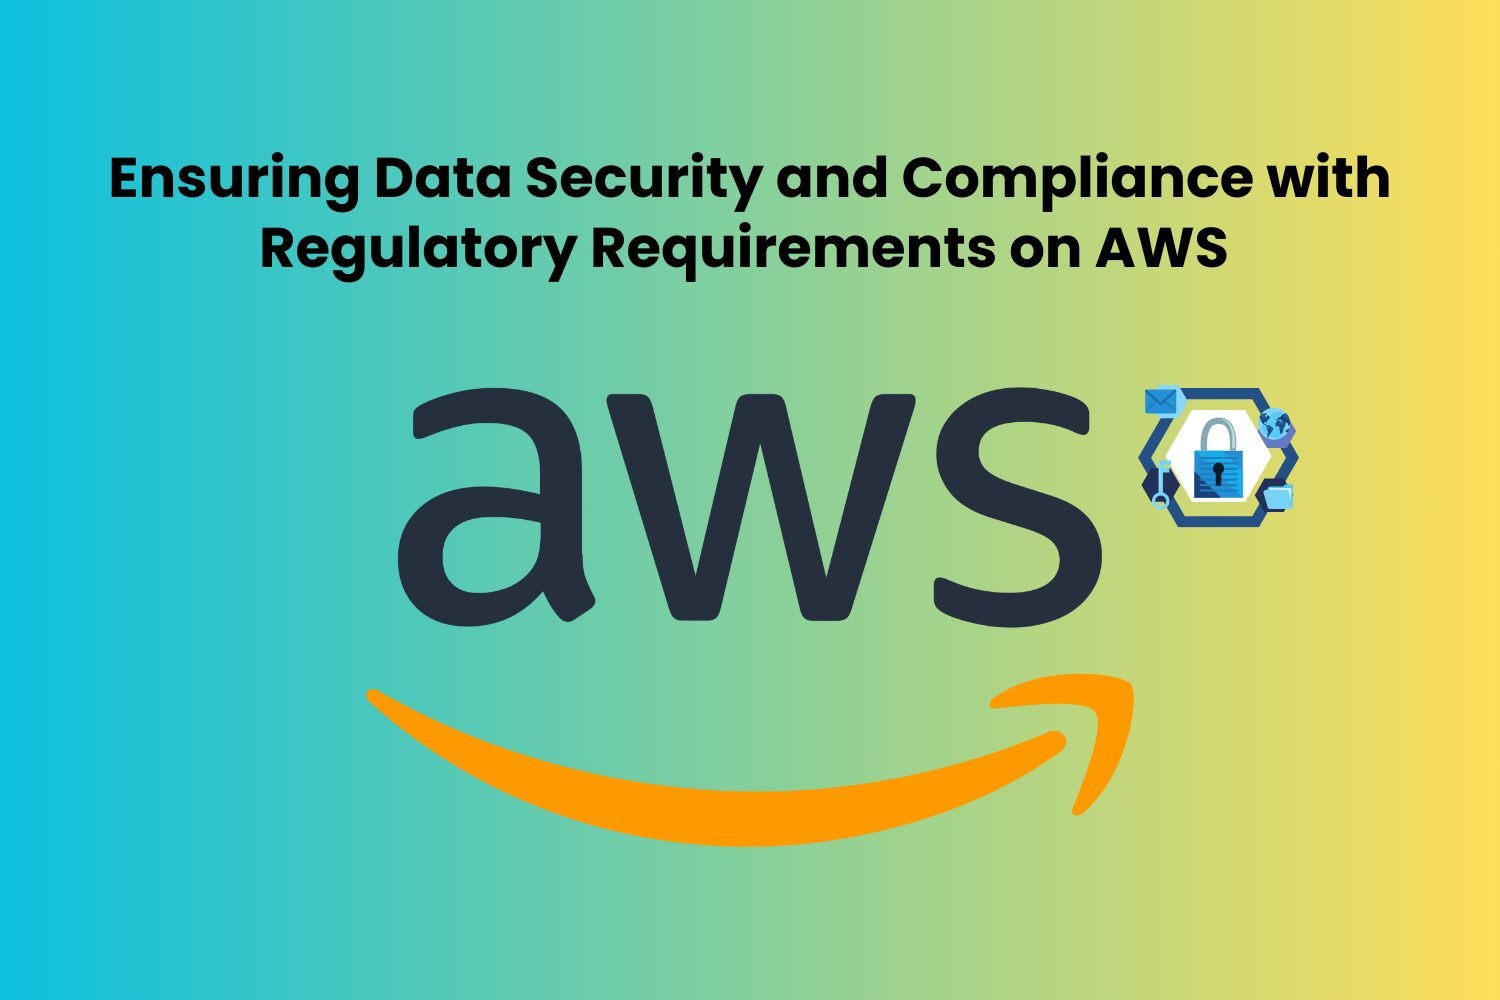 Ensuring Data Security and Compliance with Regulatory Requirements on AWS